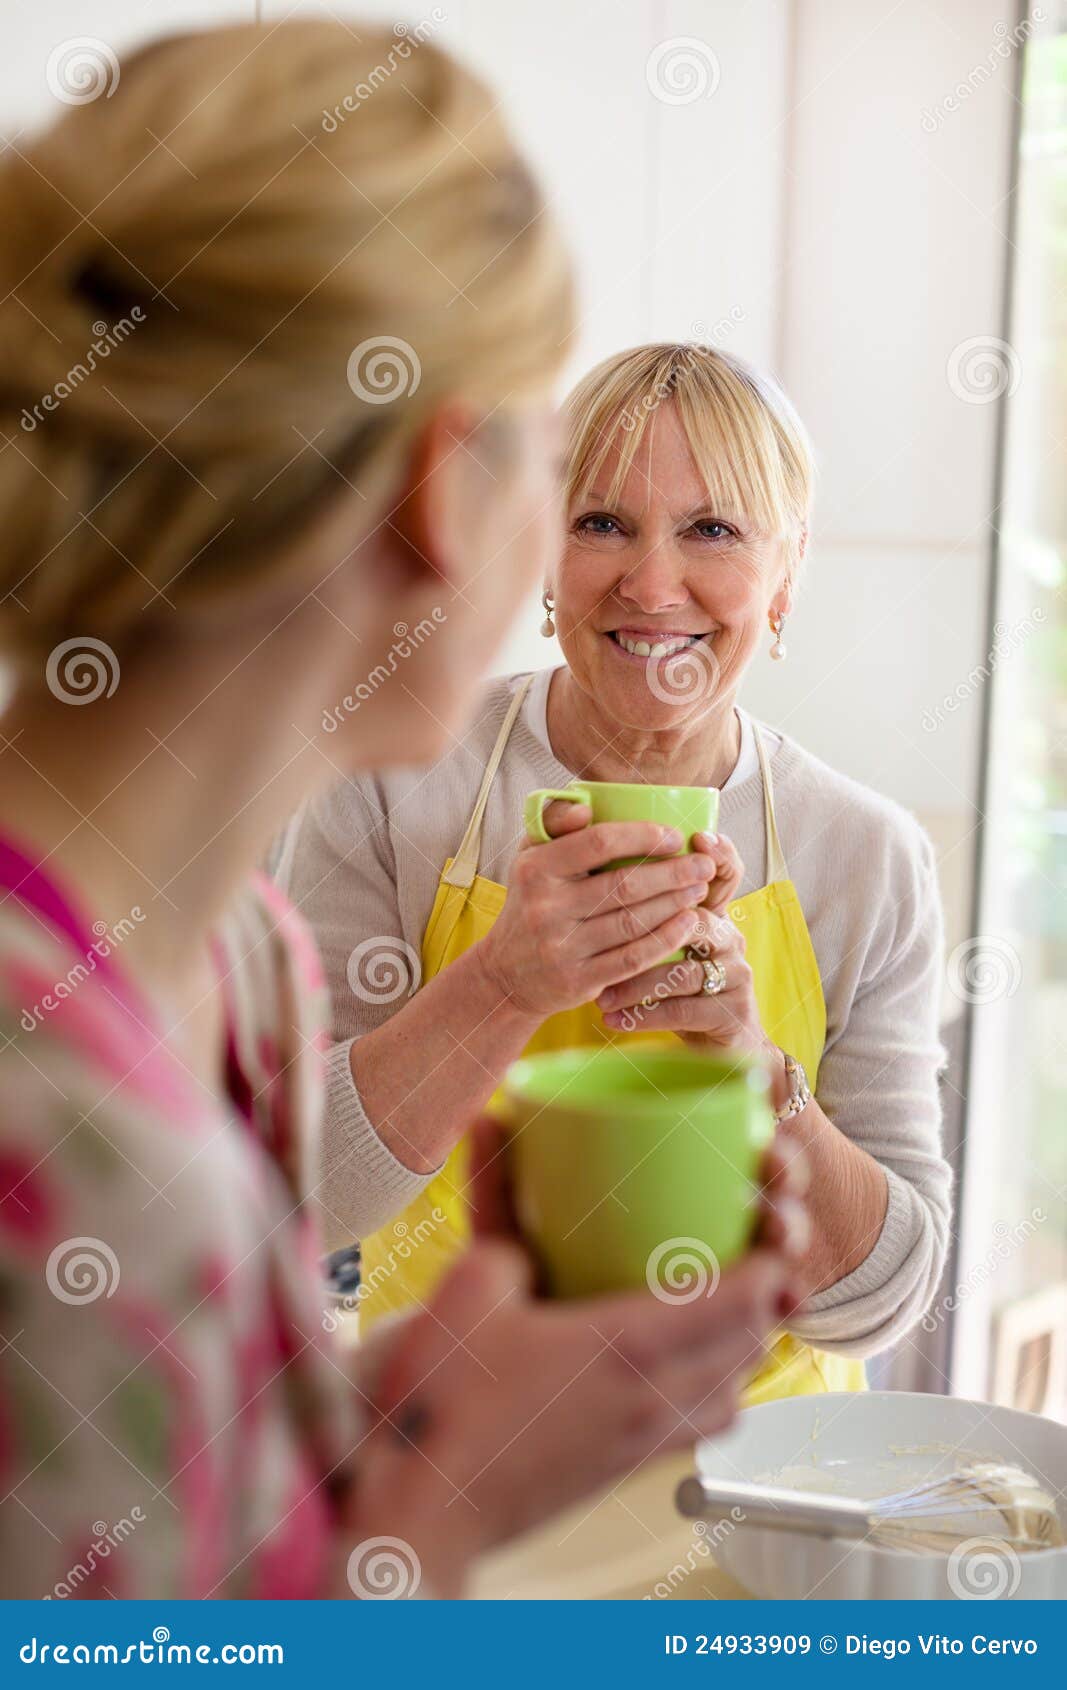 Mother And Daughter Drinking Coffee In Kitchen Royalty Free Stock Images Image 24933909